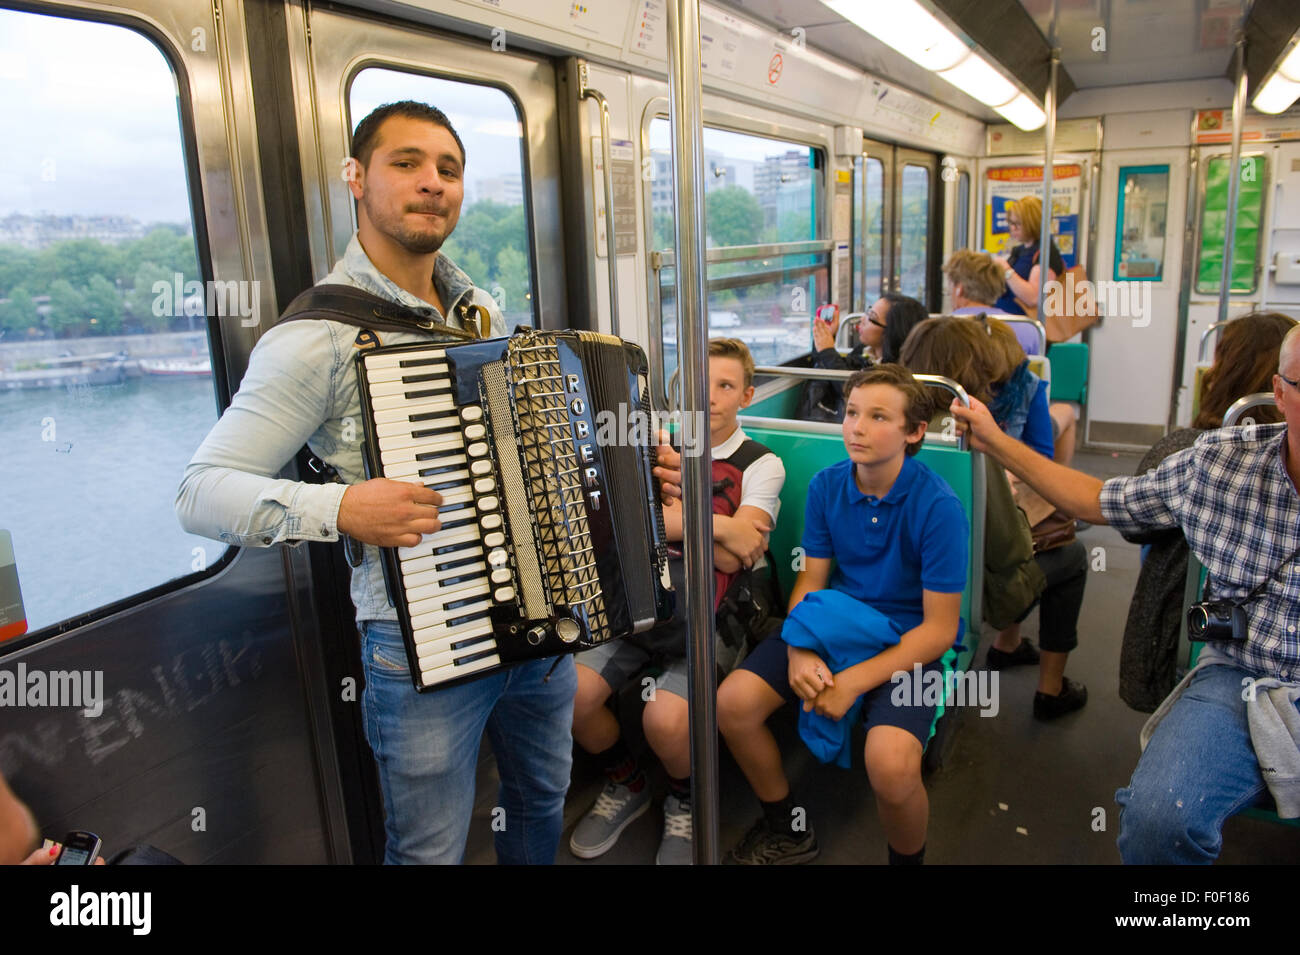 PARIS, FRANCE - JULY 28, 2015: A musician is playing accordion in the metro in Paris in France Stock Photo